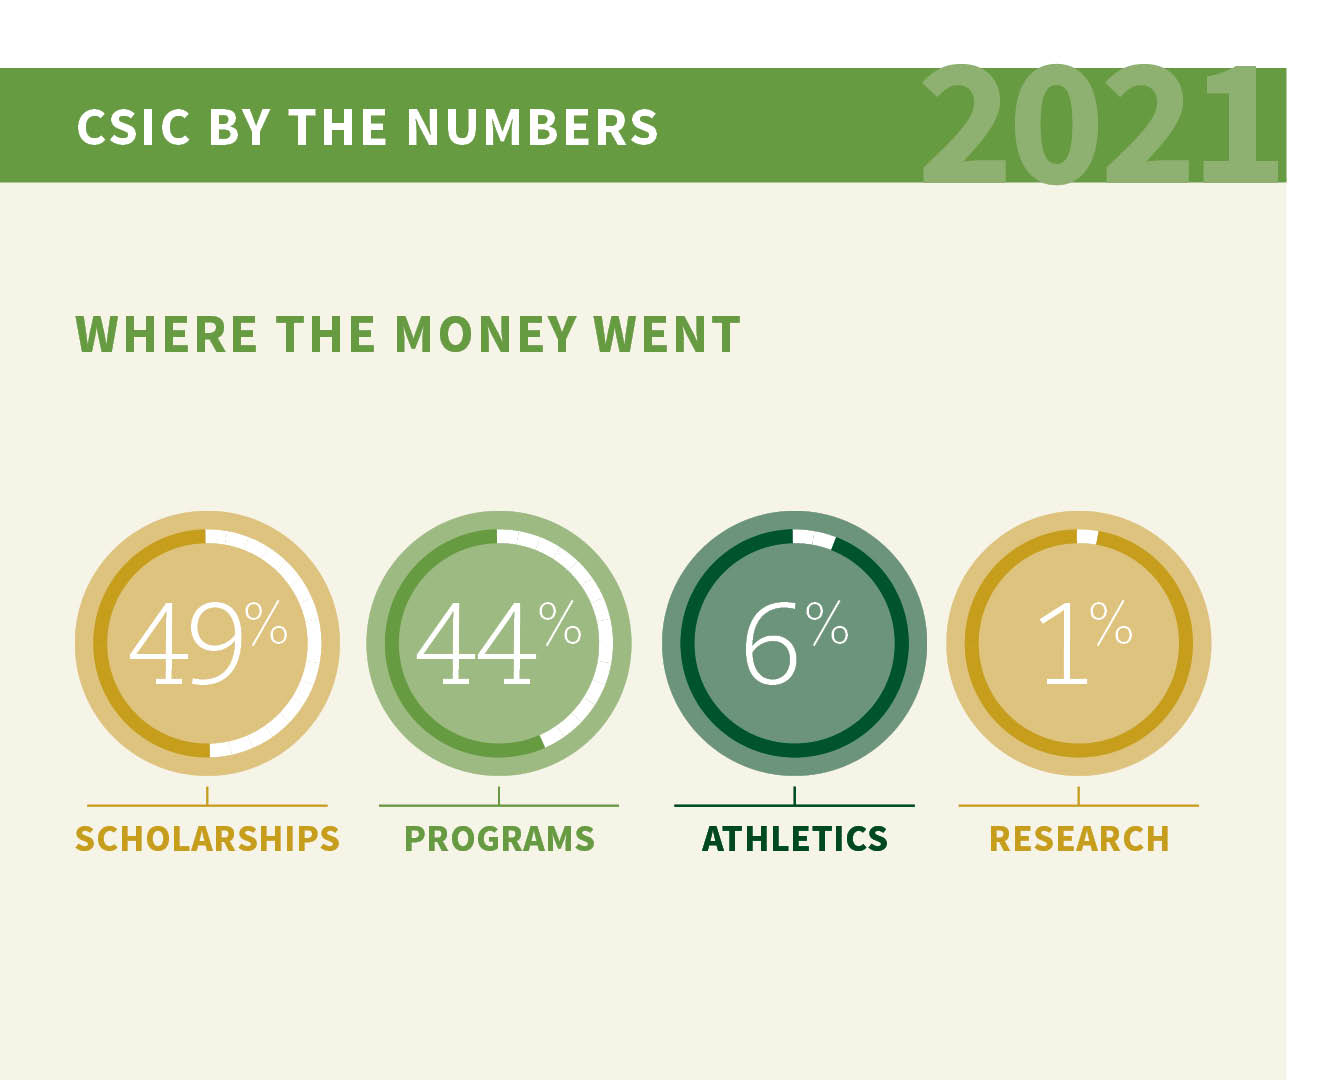 Where the money went, 49% scholarships, 44% programs, 6% athletics, 1% research